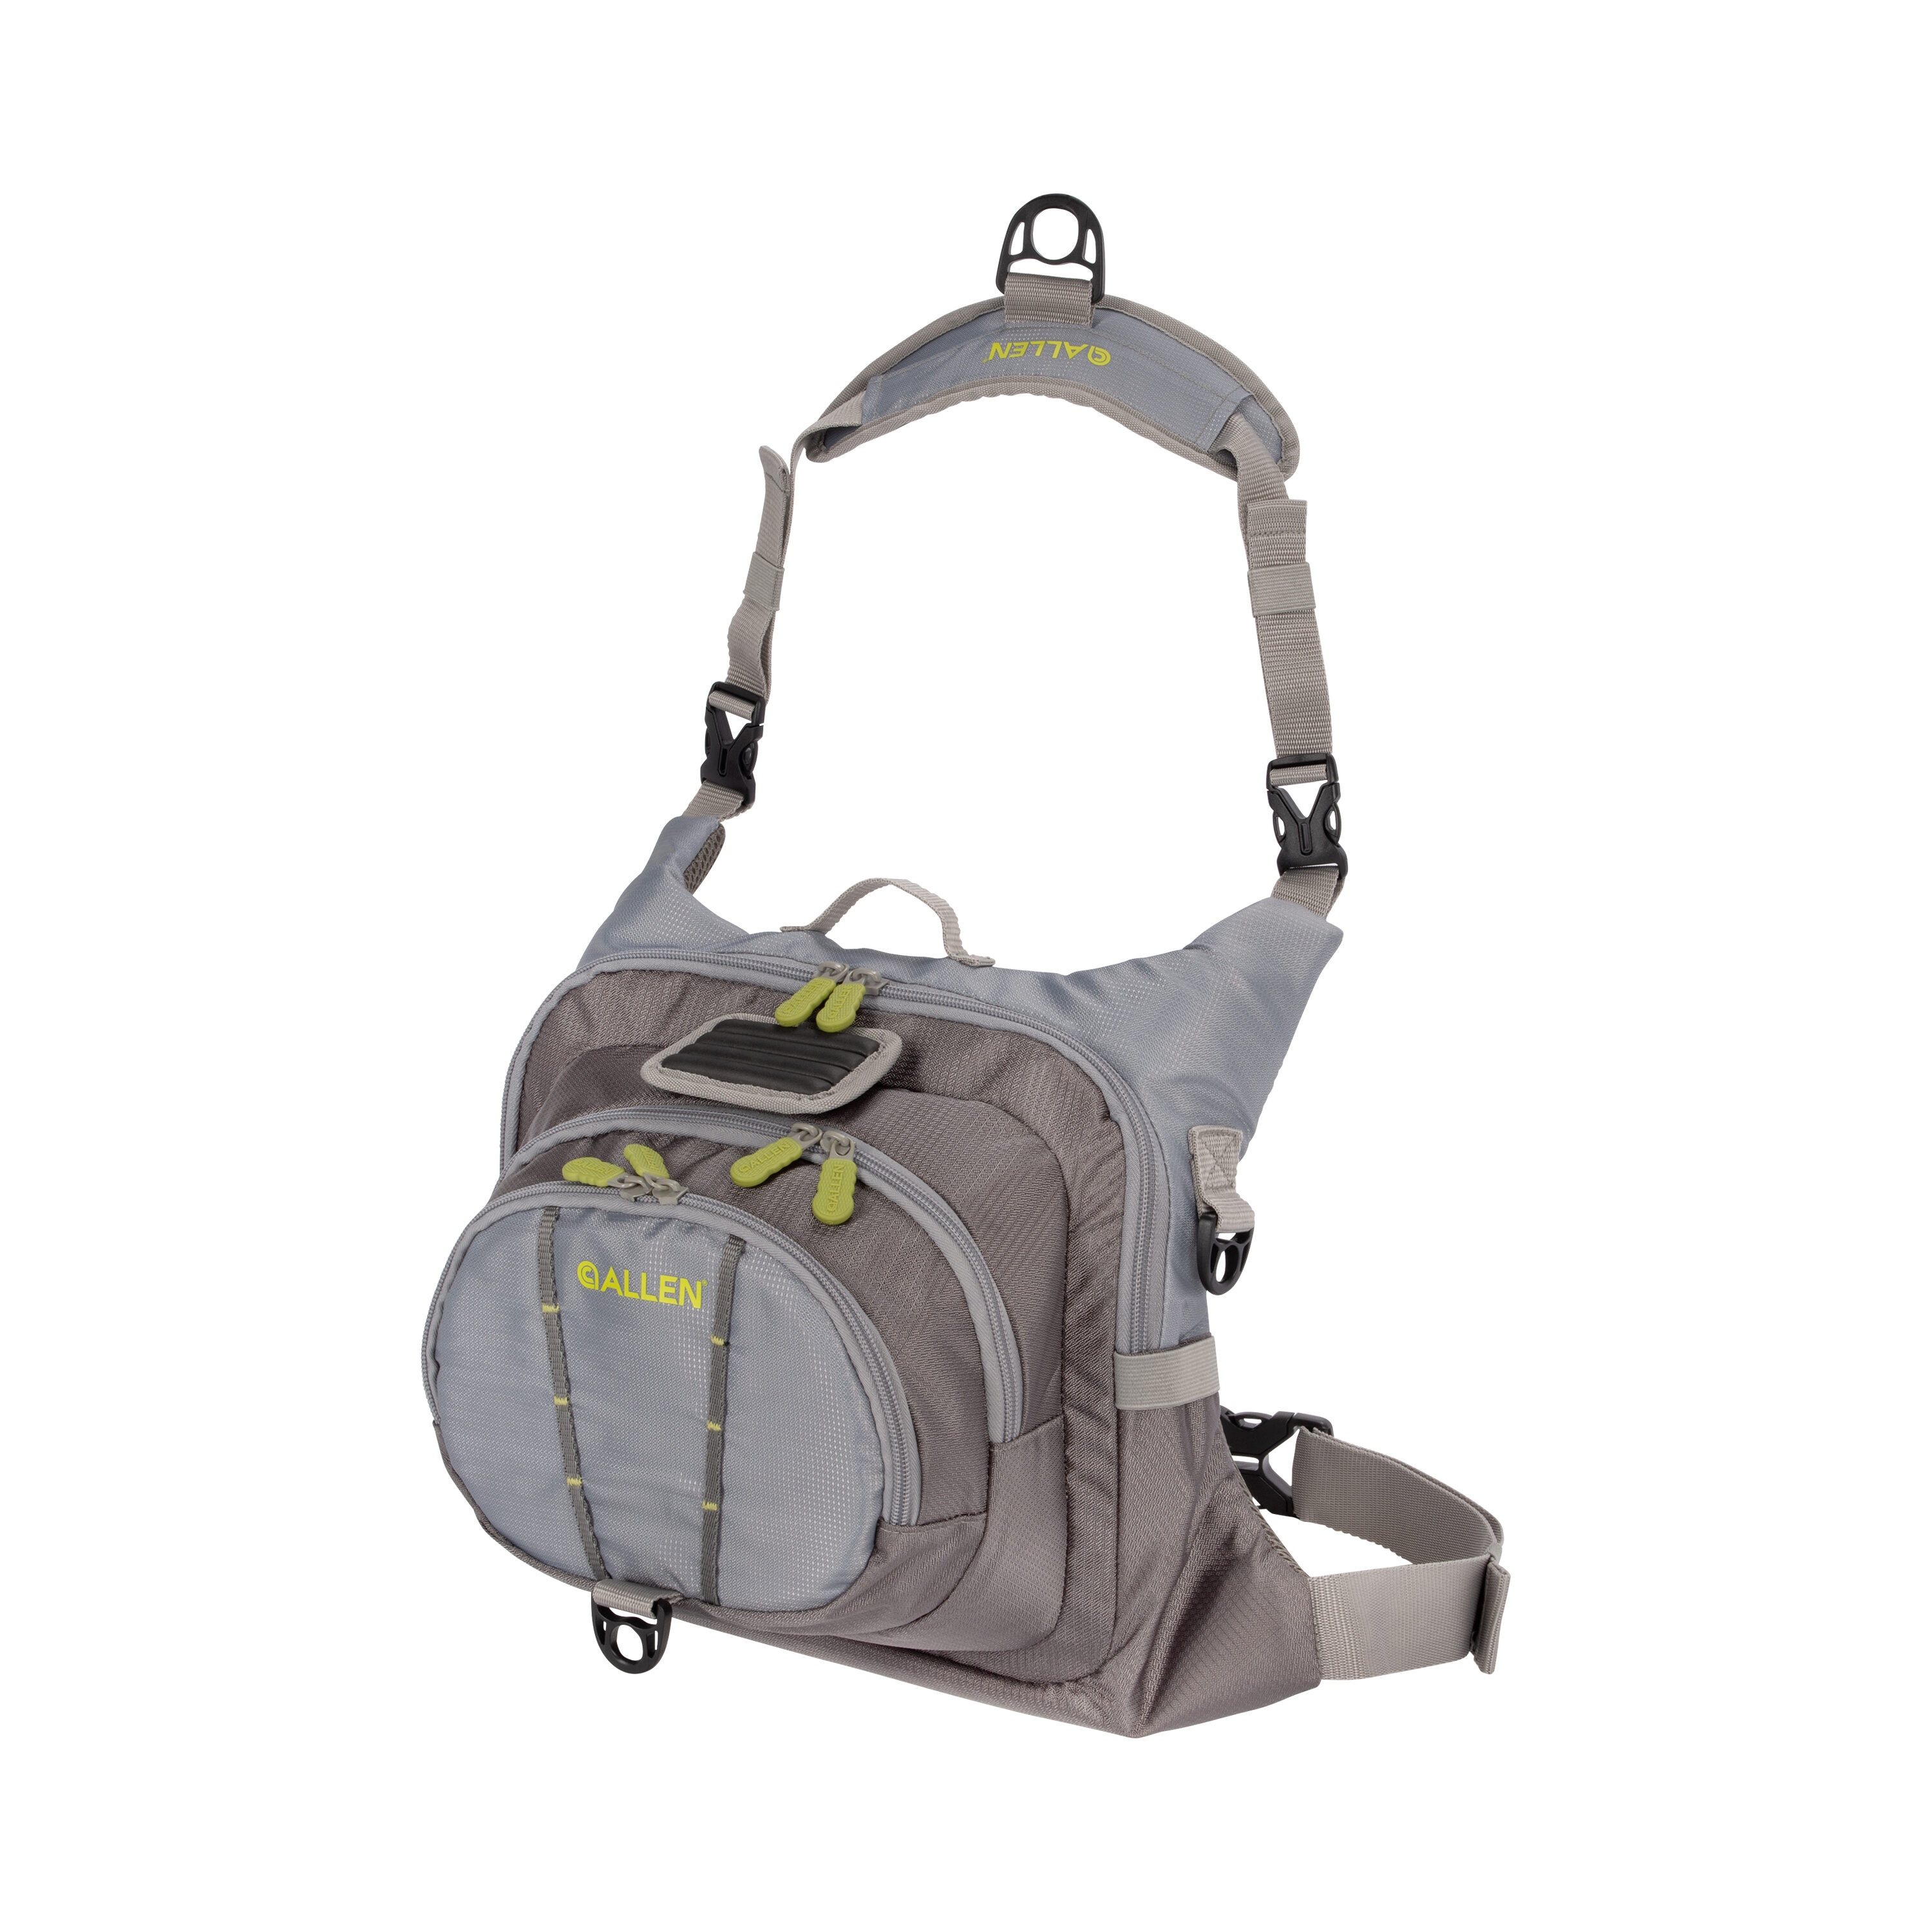 Allen Company Eagle River Lumbar Fly Fishing Pack, Fits up to 6 Tackle/Fly  Boxes, Gray/Lime